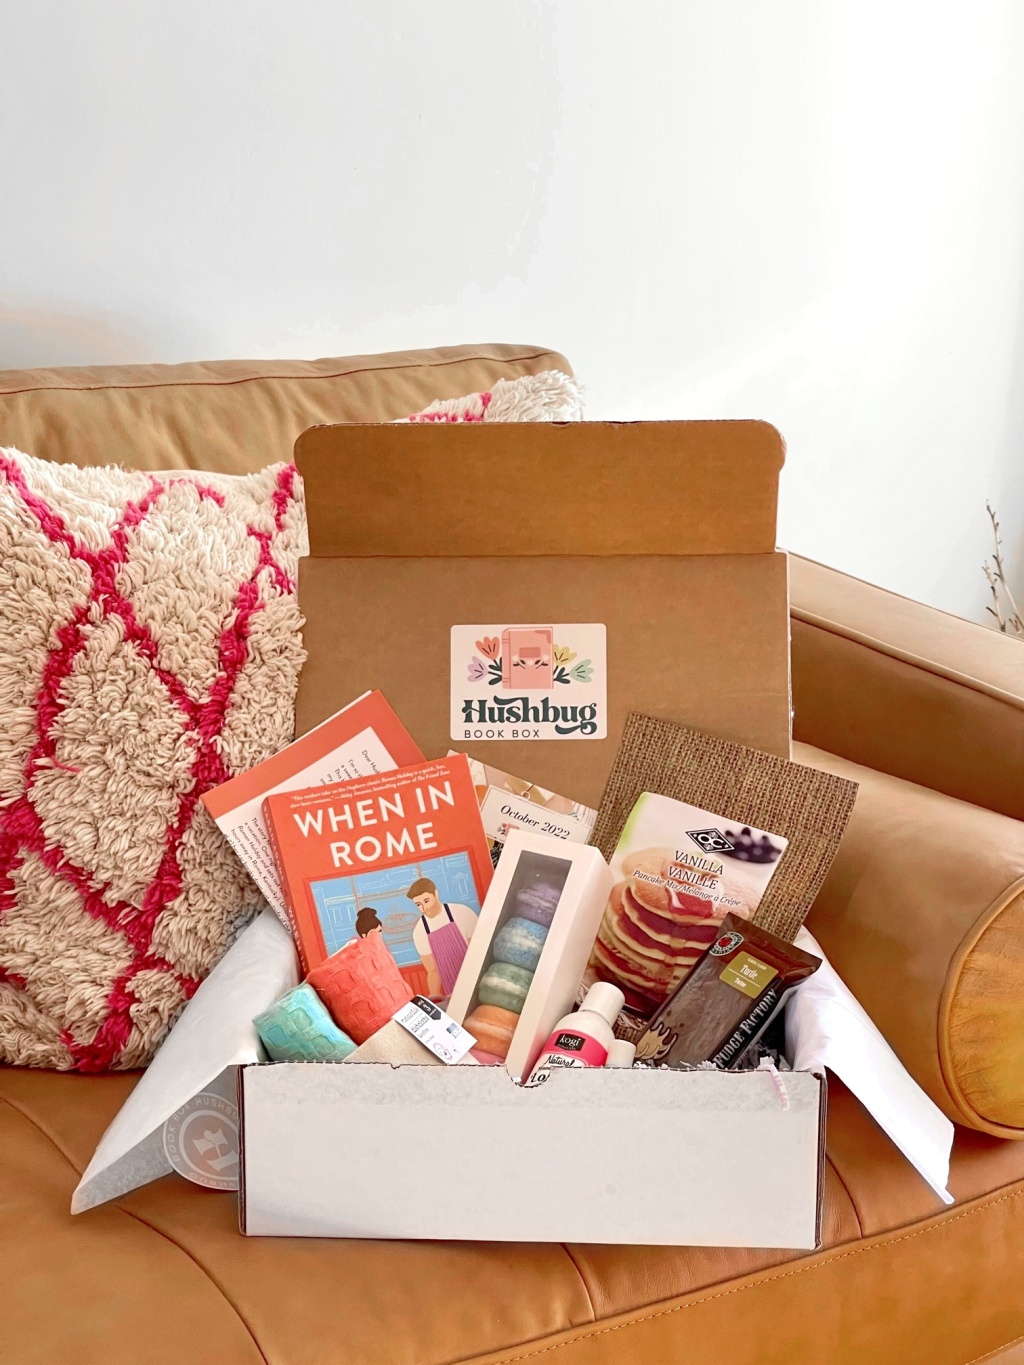 A book box for rom com lovers: Hushbug Book Box October 2022 🇨🇦